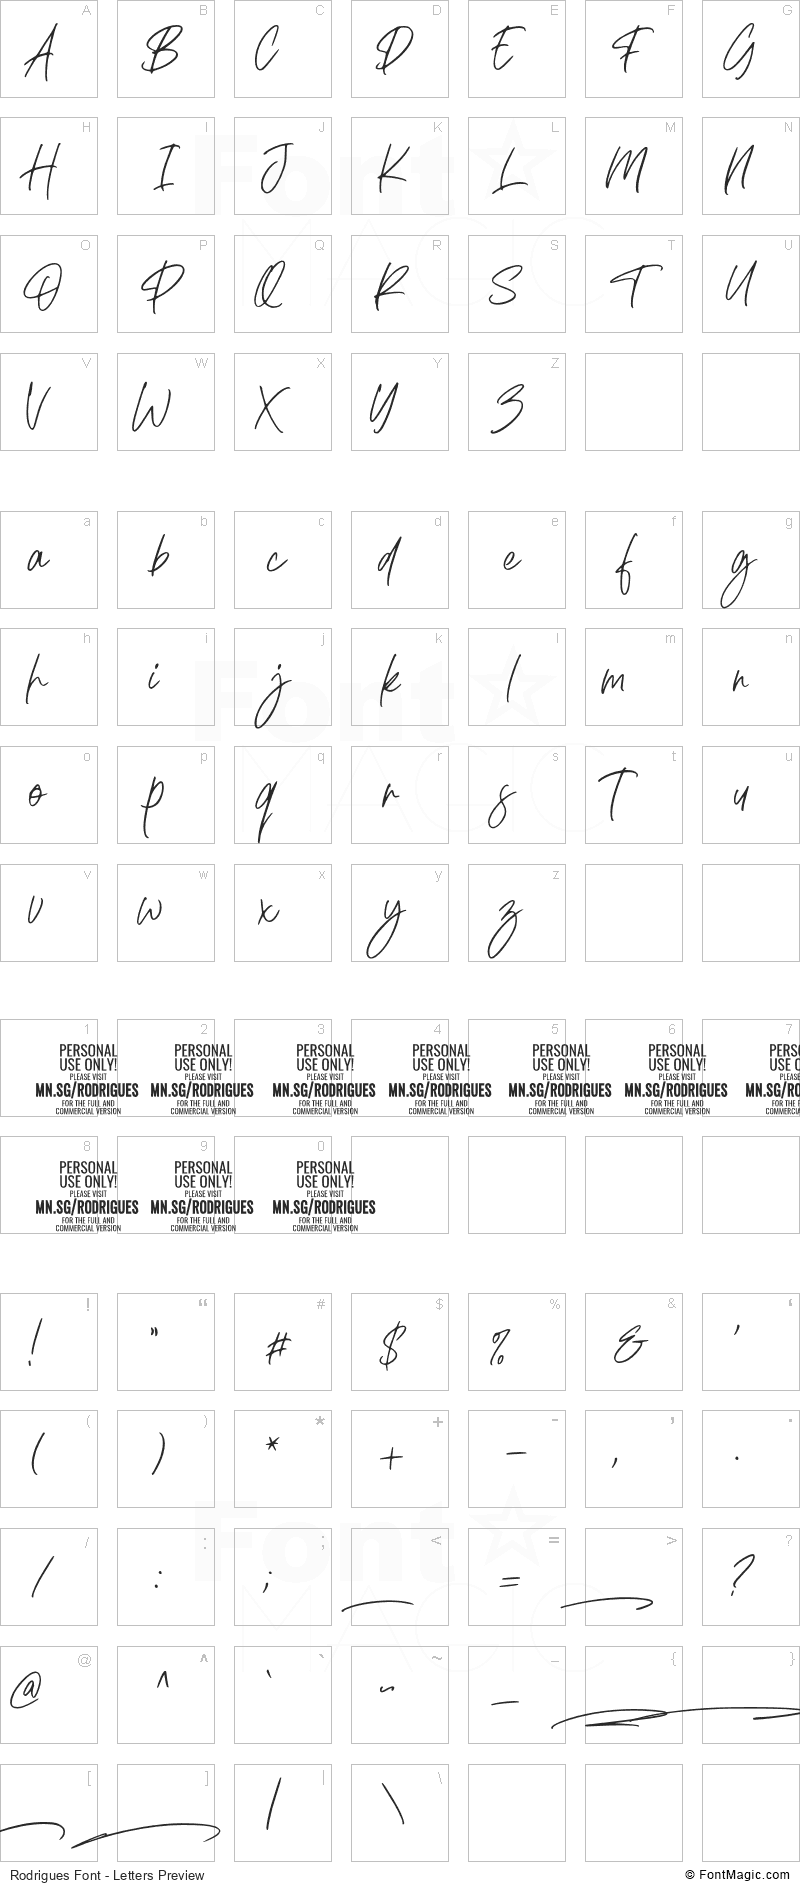 Rodrigues Font - All Latters Preview Chart